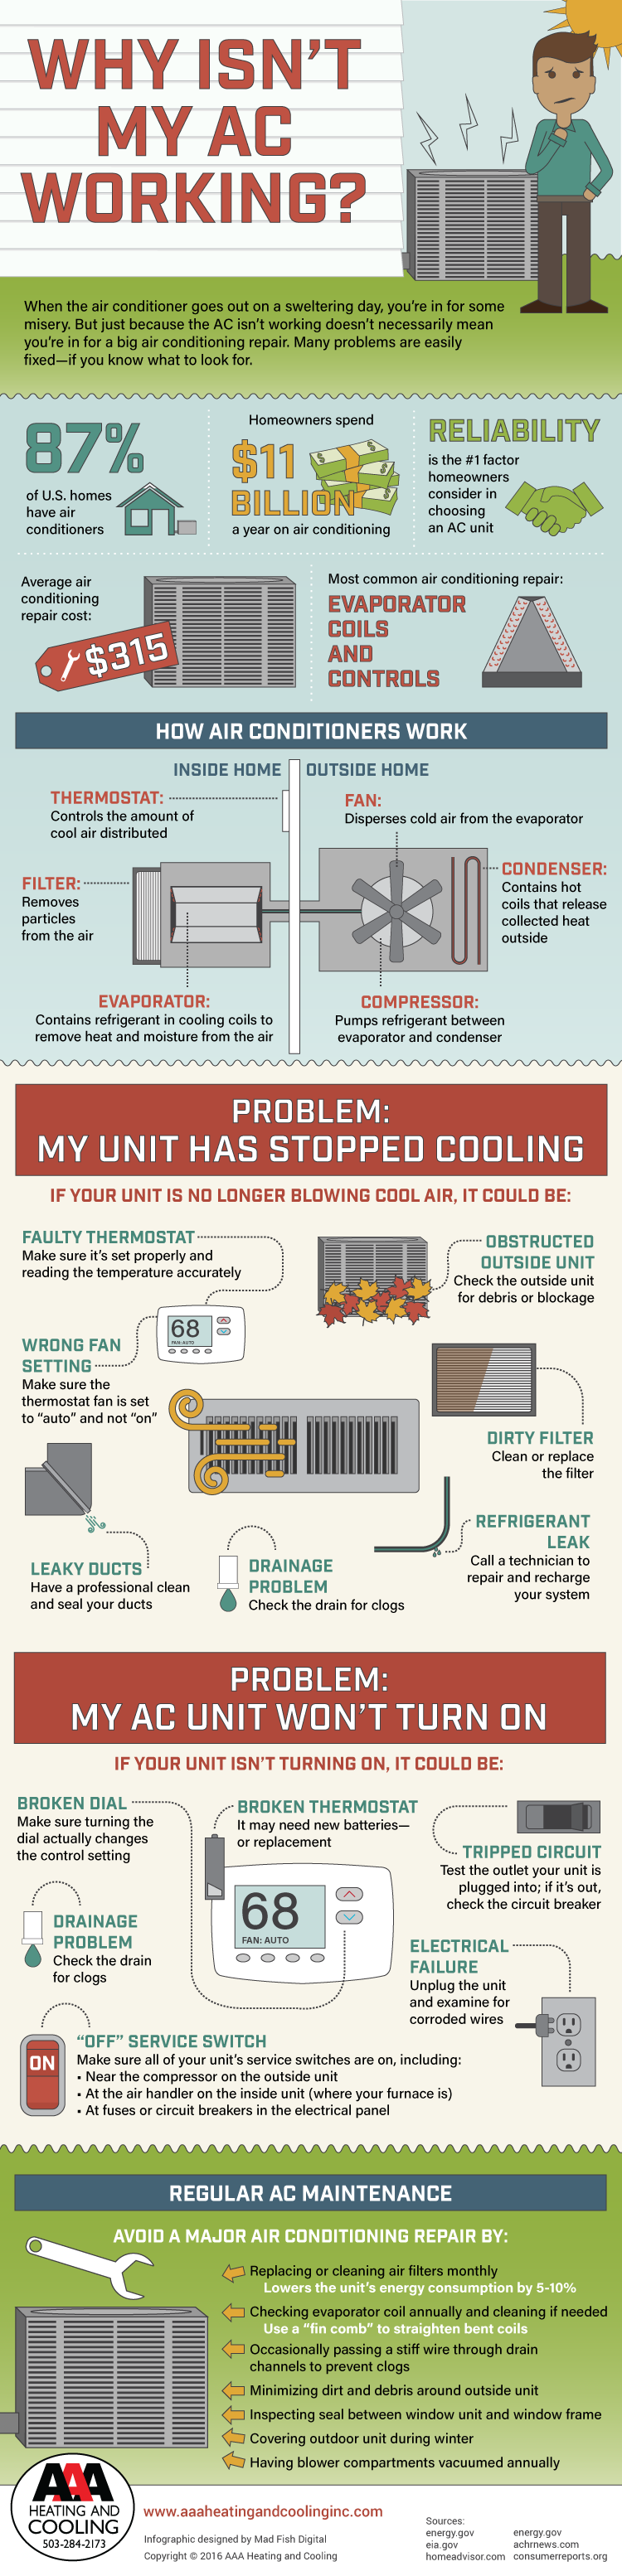 Why Isn't My Air Conditioning Unit Working?